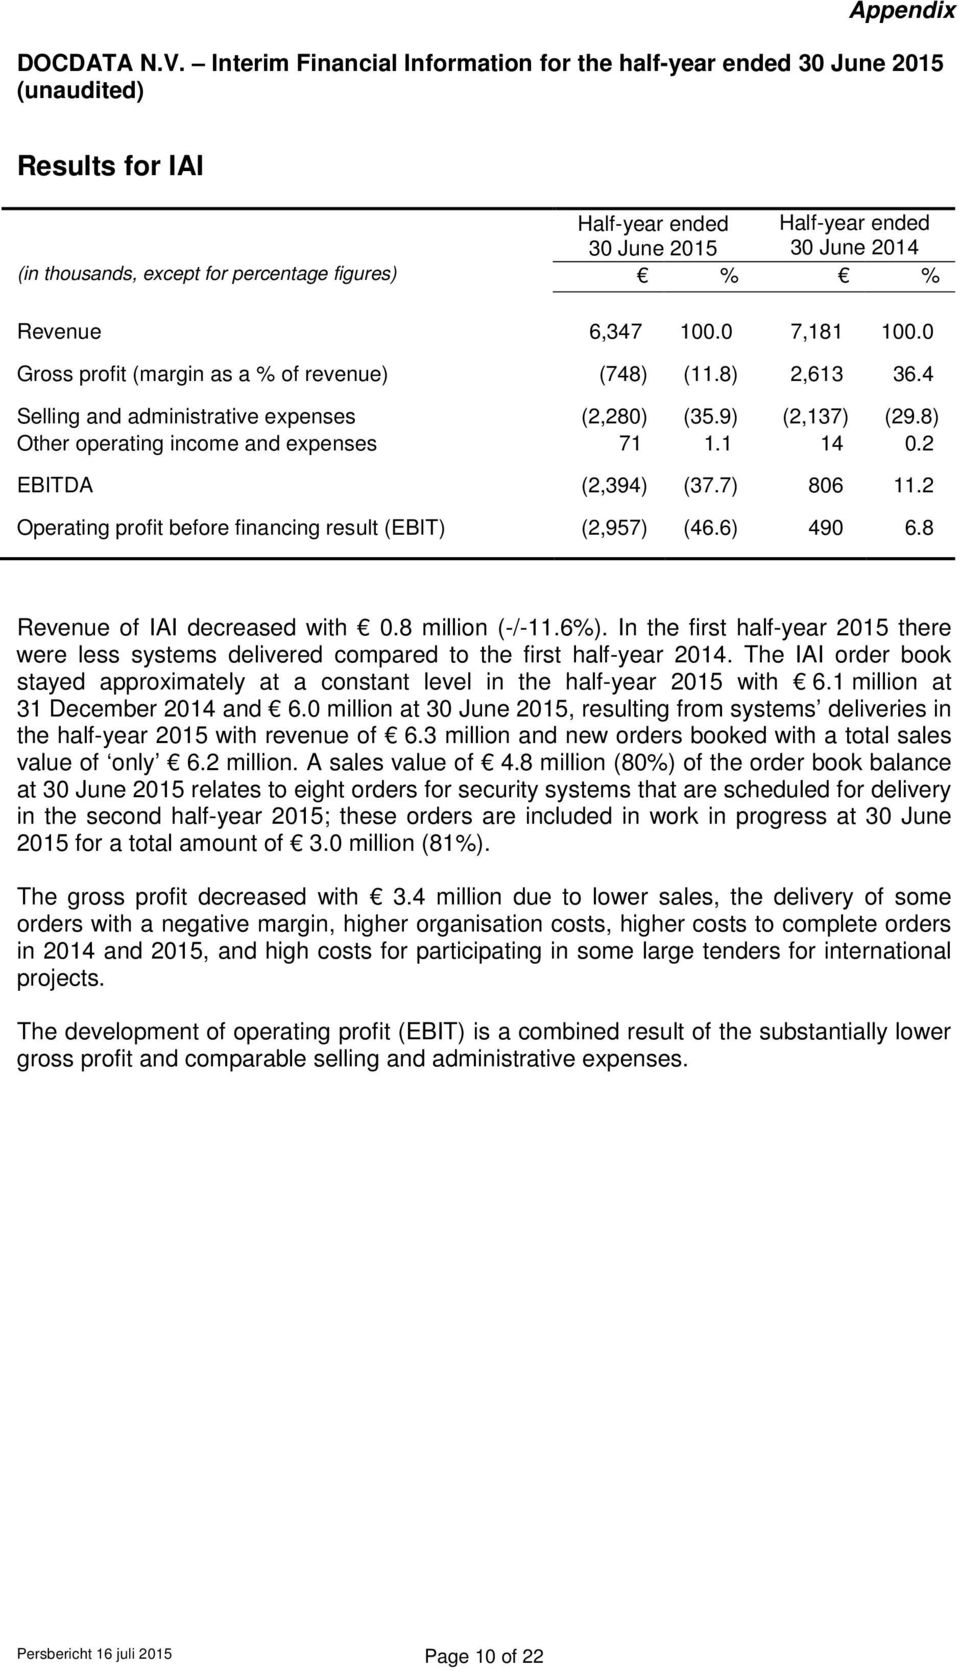 2 Operating profit before financing result (EBIT) (2,957) (46.6) 490 6.8 Revenue of IAI decreased with 0.8 million (-/-11.6%).